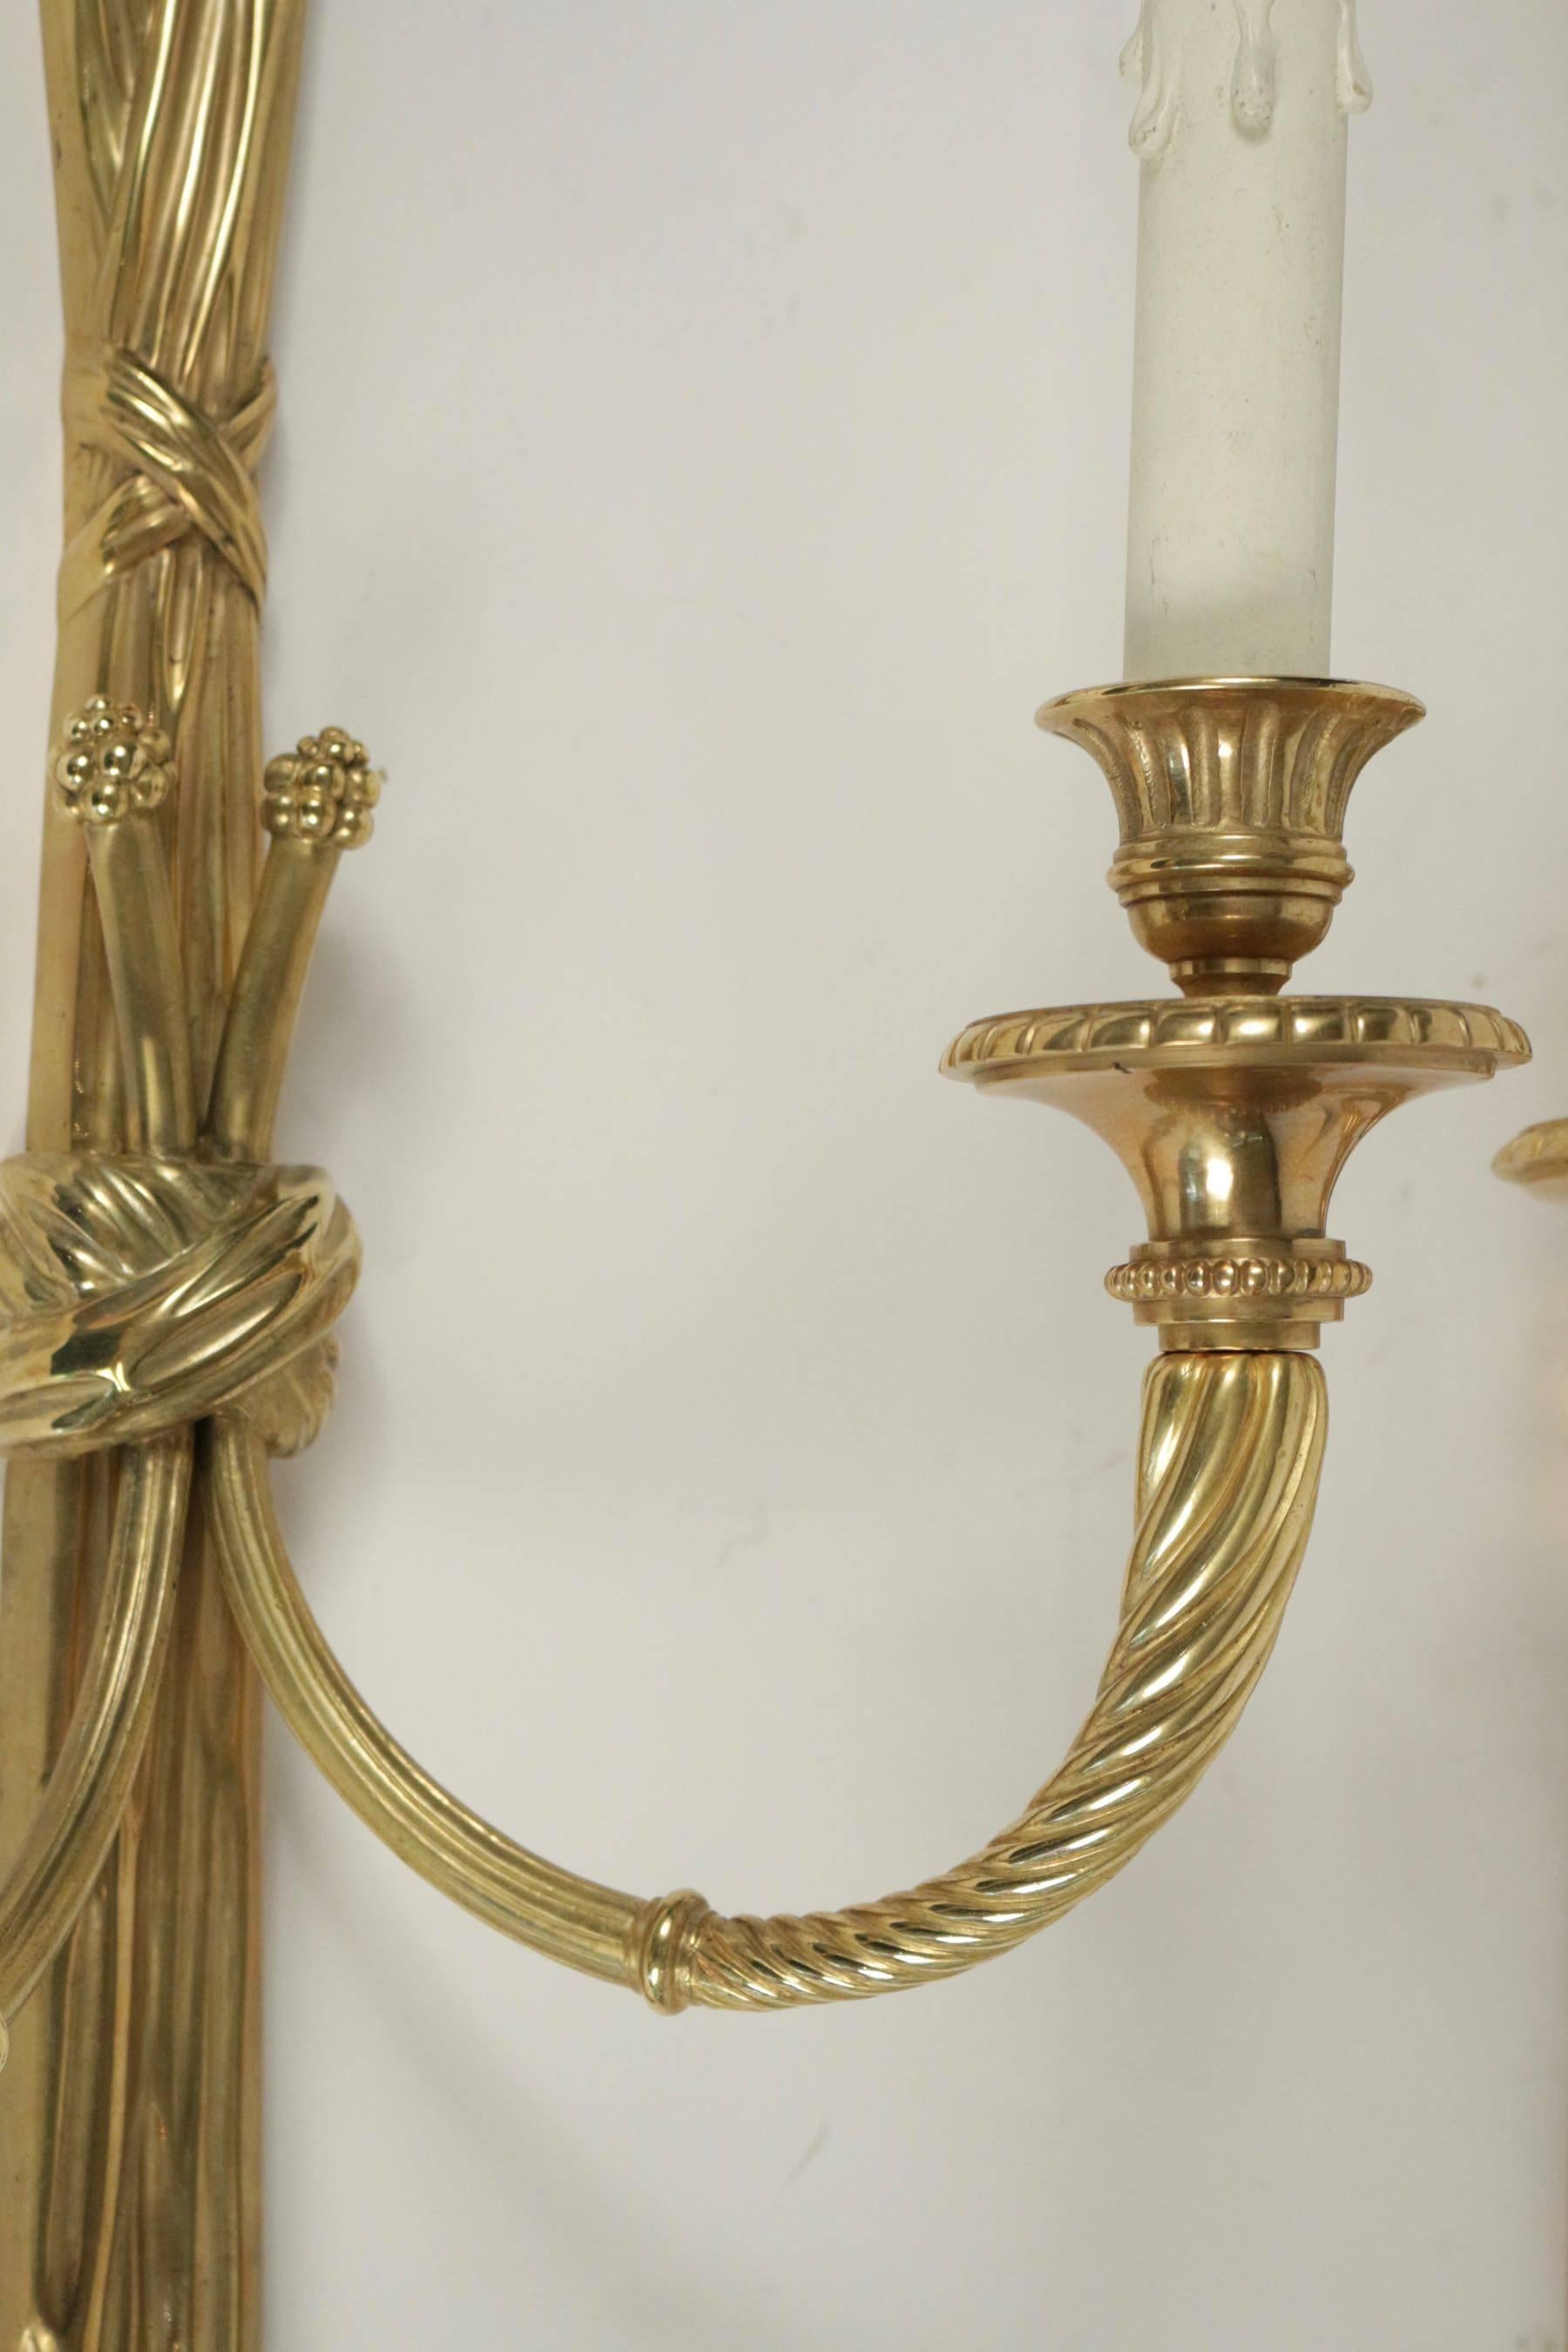 Bronze Important Pair of Sconces in the Style of Louis XVI from the 19th Century